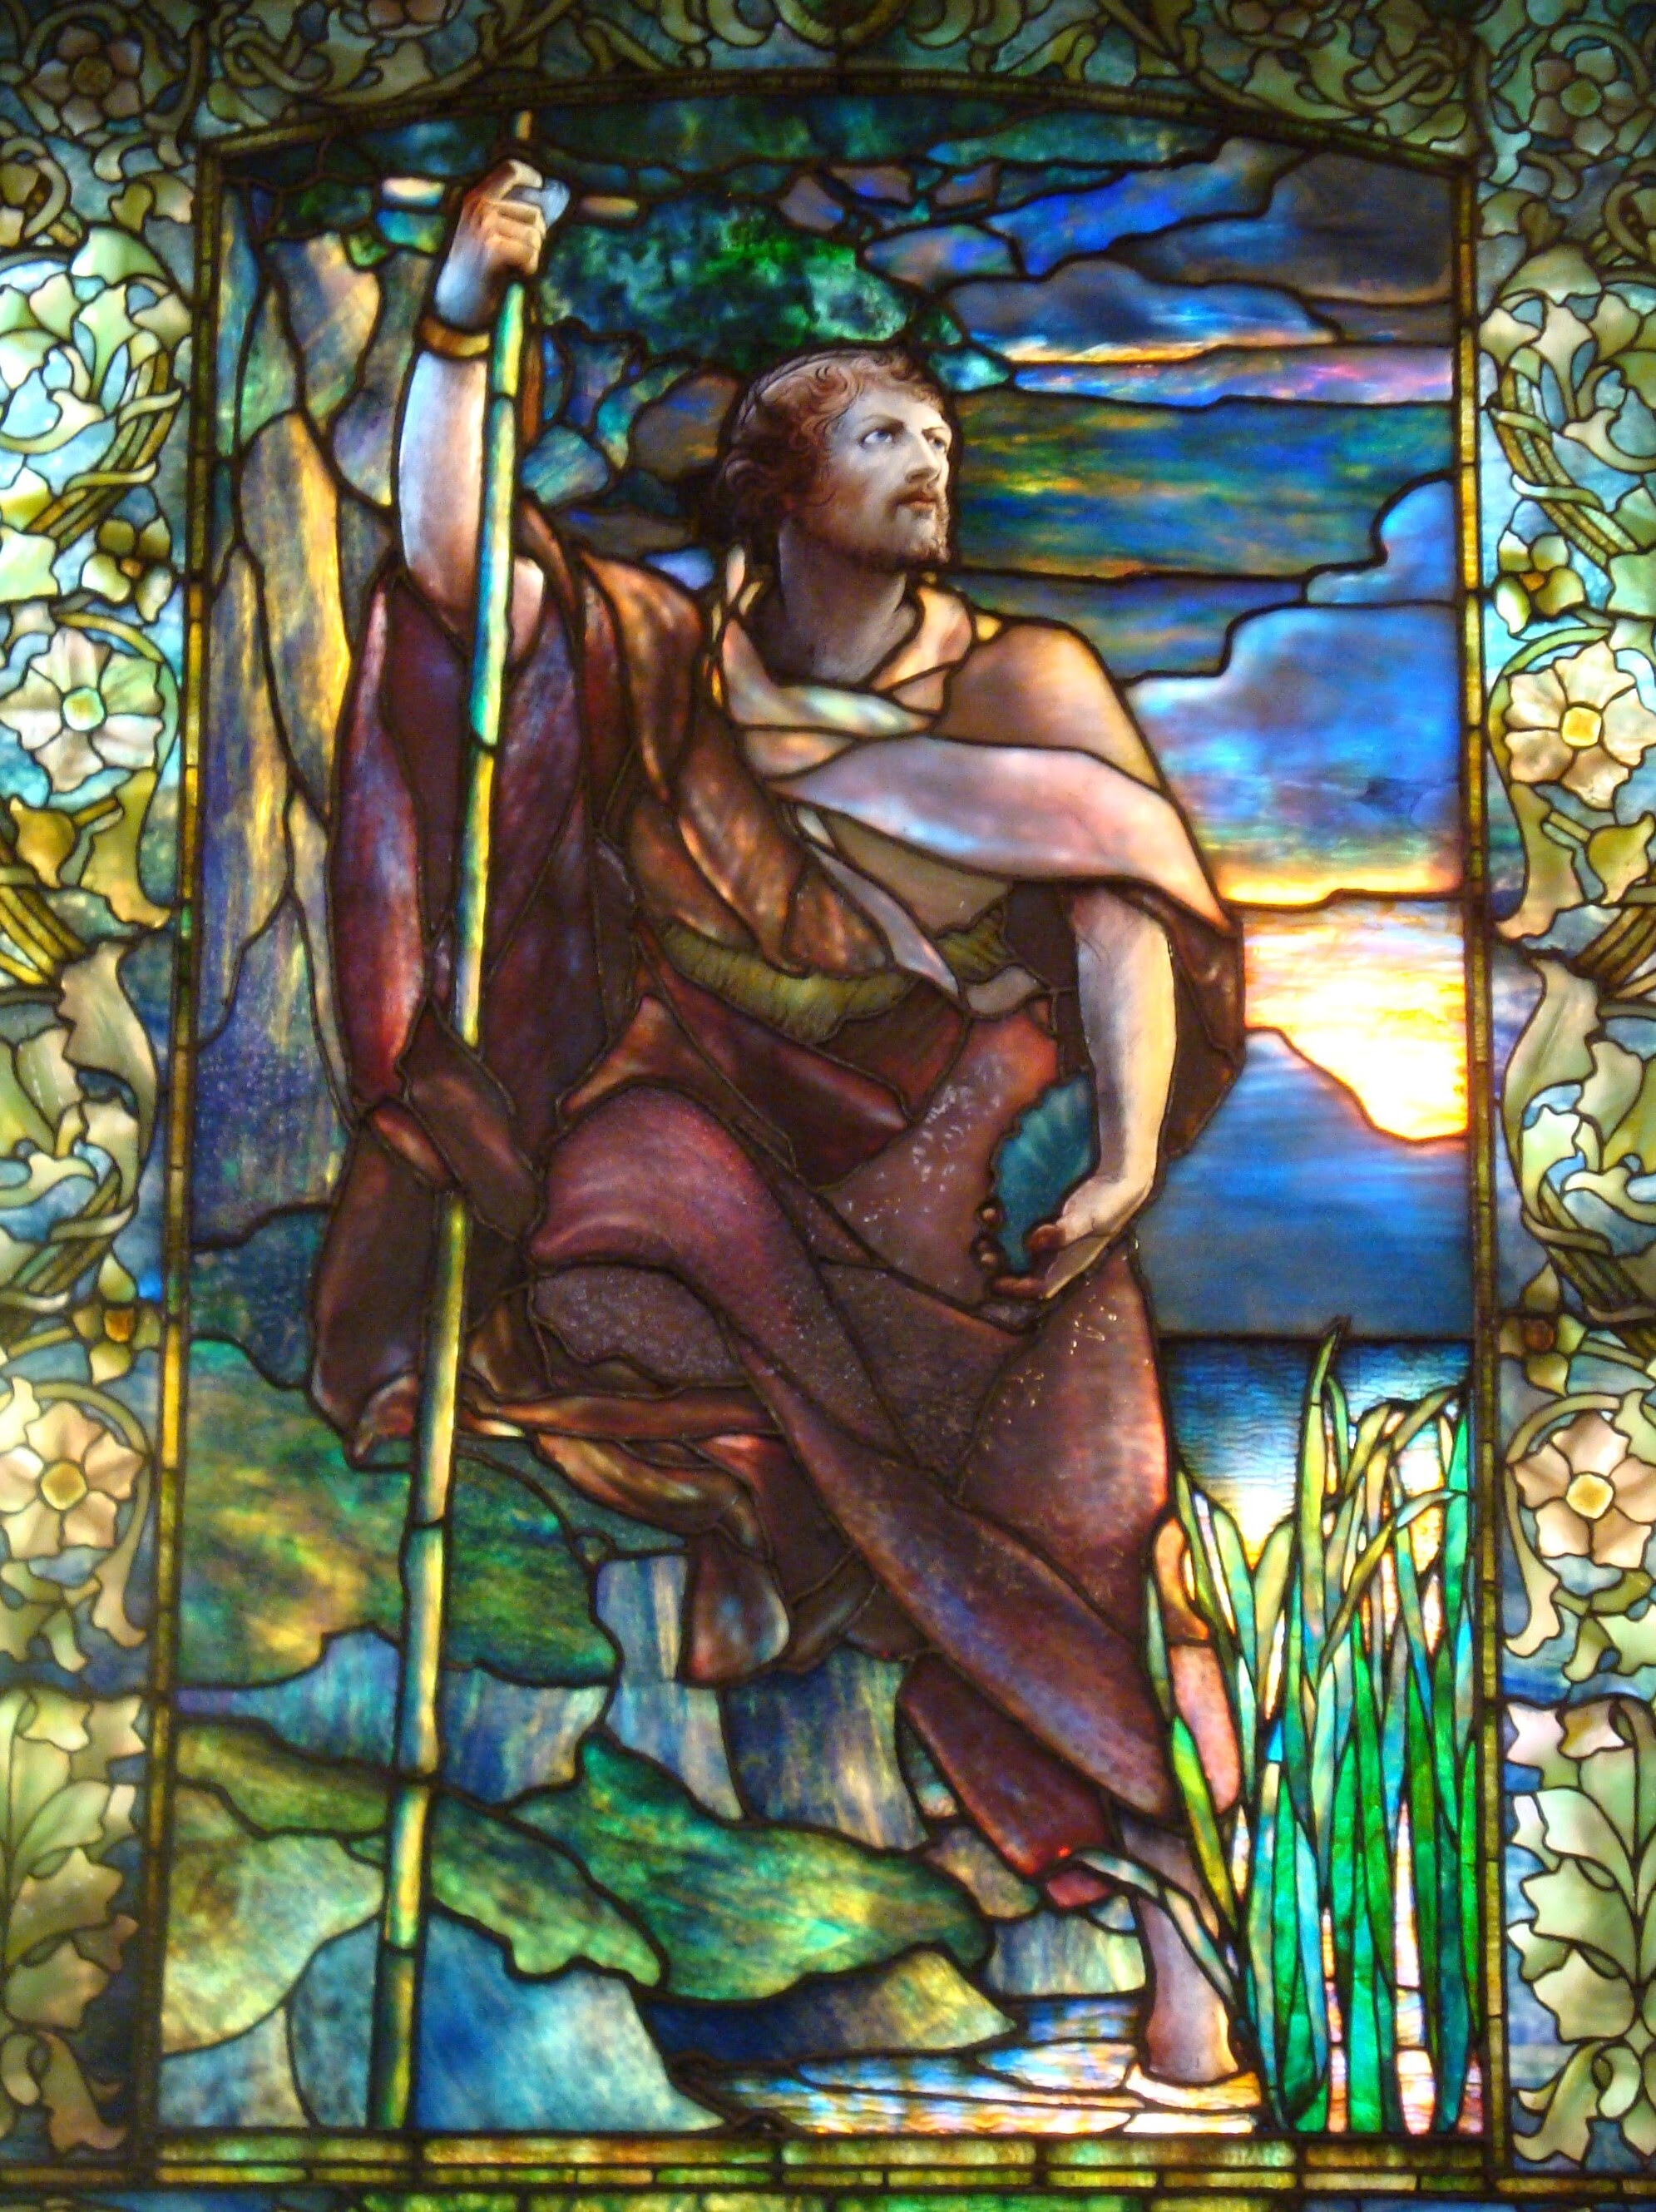 John the Baptist, stands with one foot in the water, ready to baptise people in a stained glass picture by Tiffany.